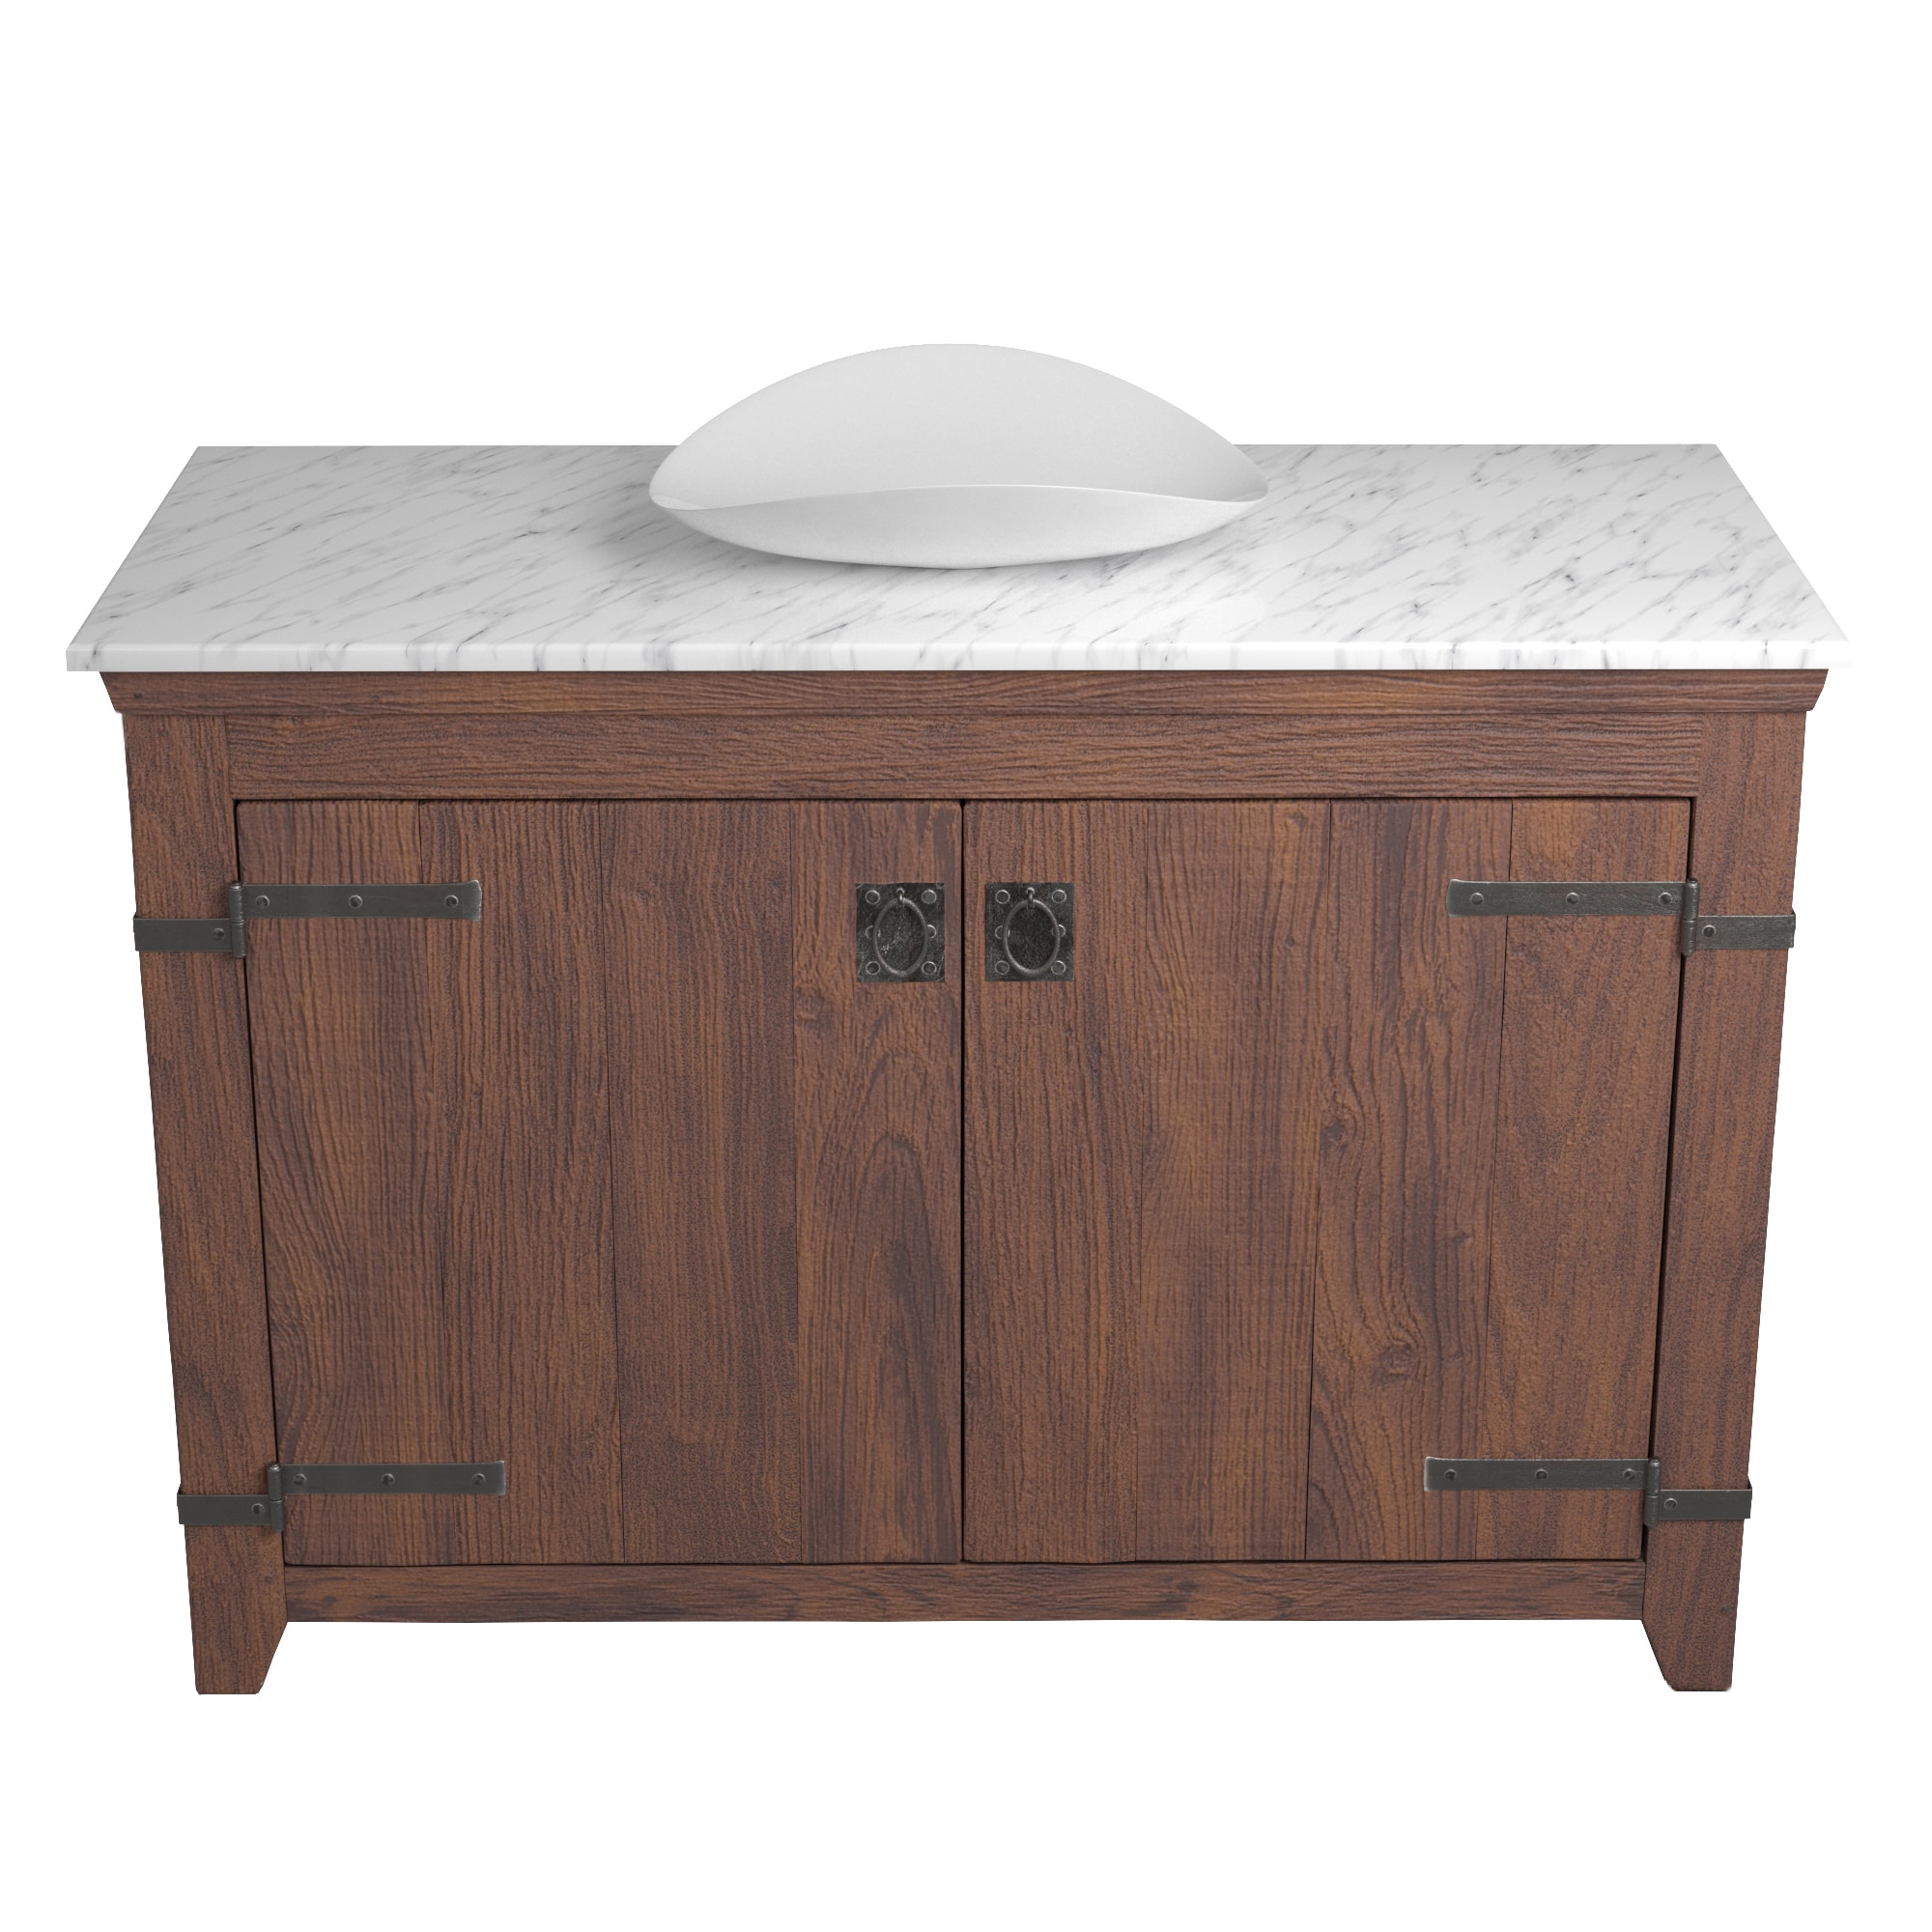 Native Trails 48" Americana Vanity in Chestnut with Carrara Marble Top and Sorrento in Bianco, Single Faucet Hole, BND48-VB-CT-MG-099